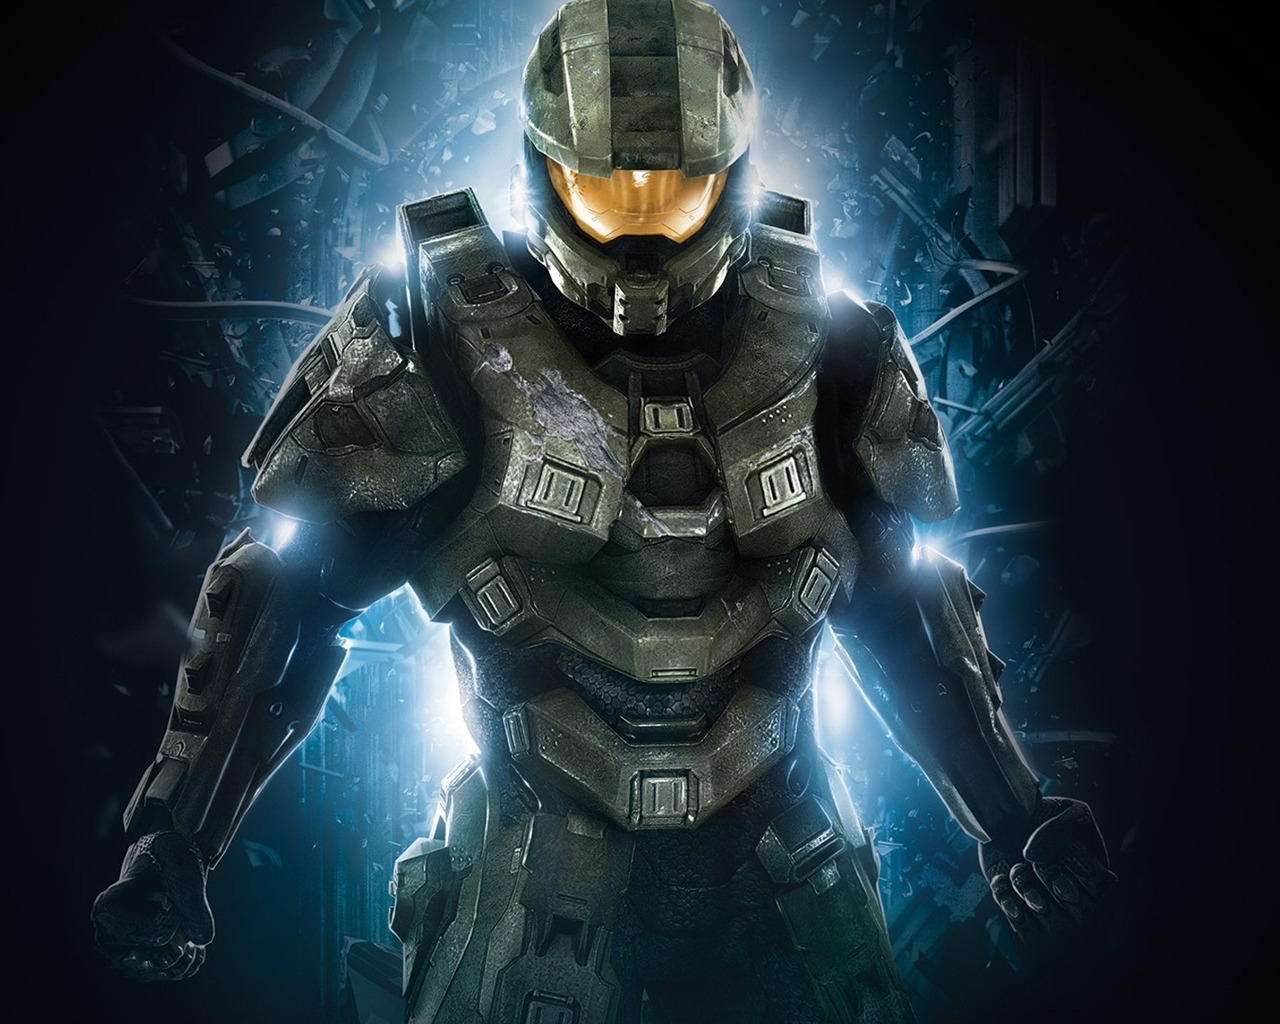 Halo Character for 1280 x 1024 resolution